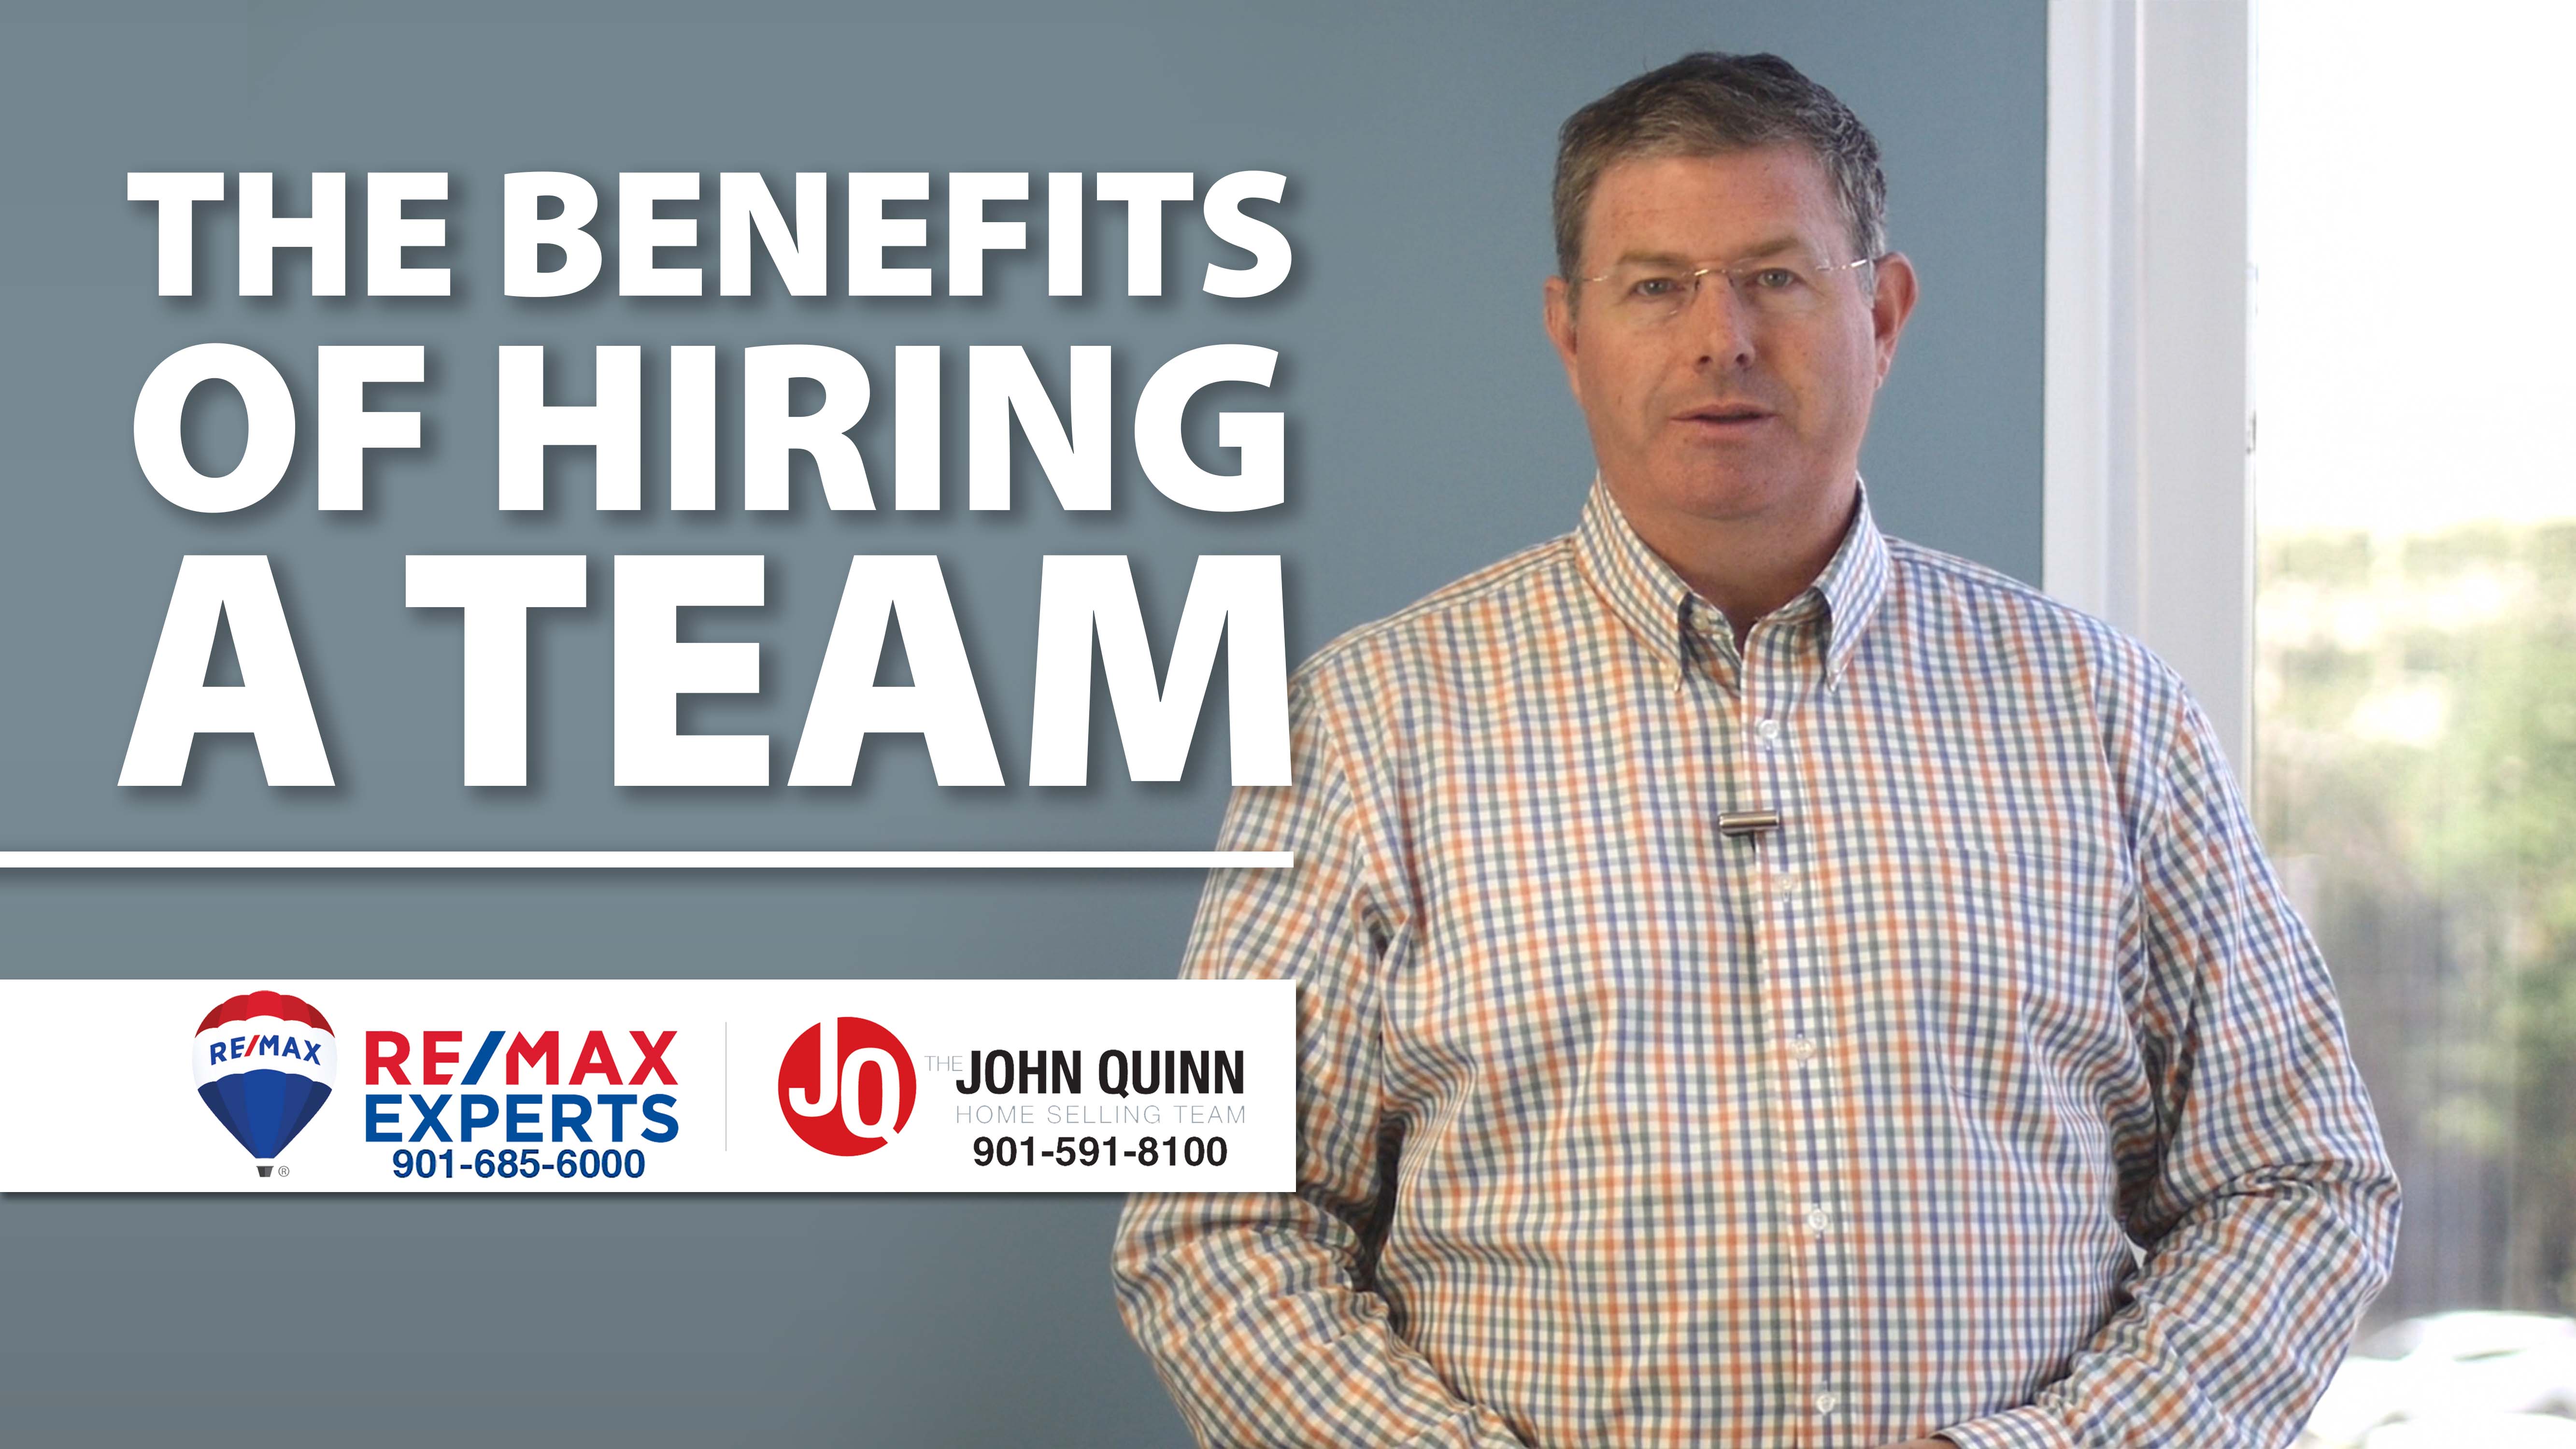 What Are the Advantages of Hiring a Team Over an Independent Agent?